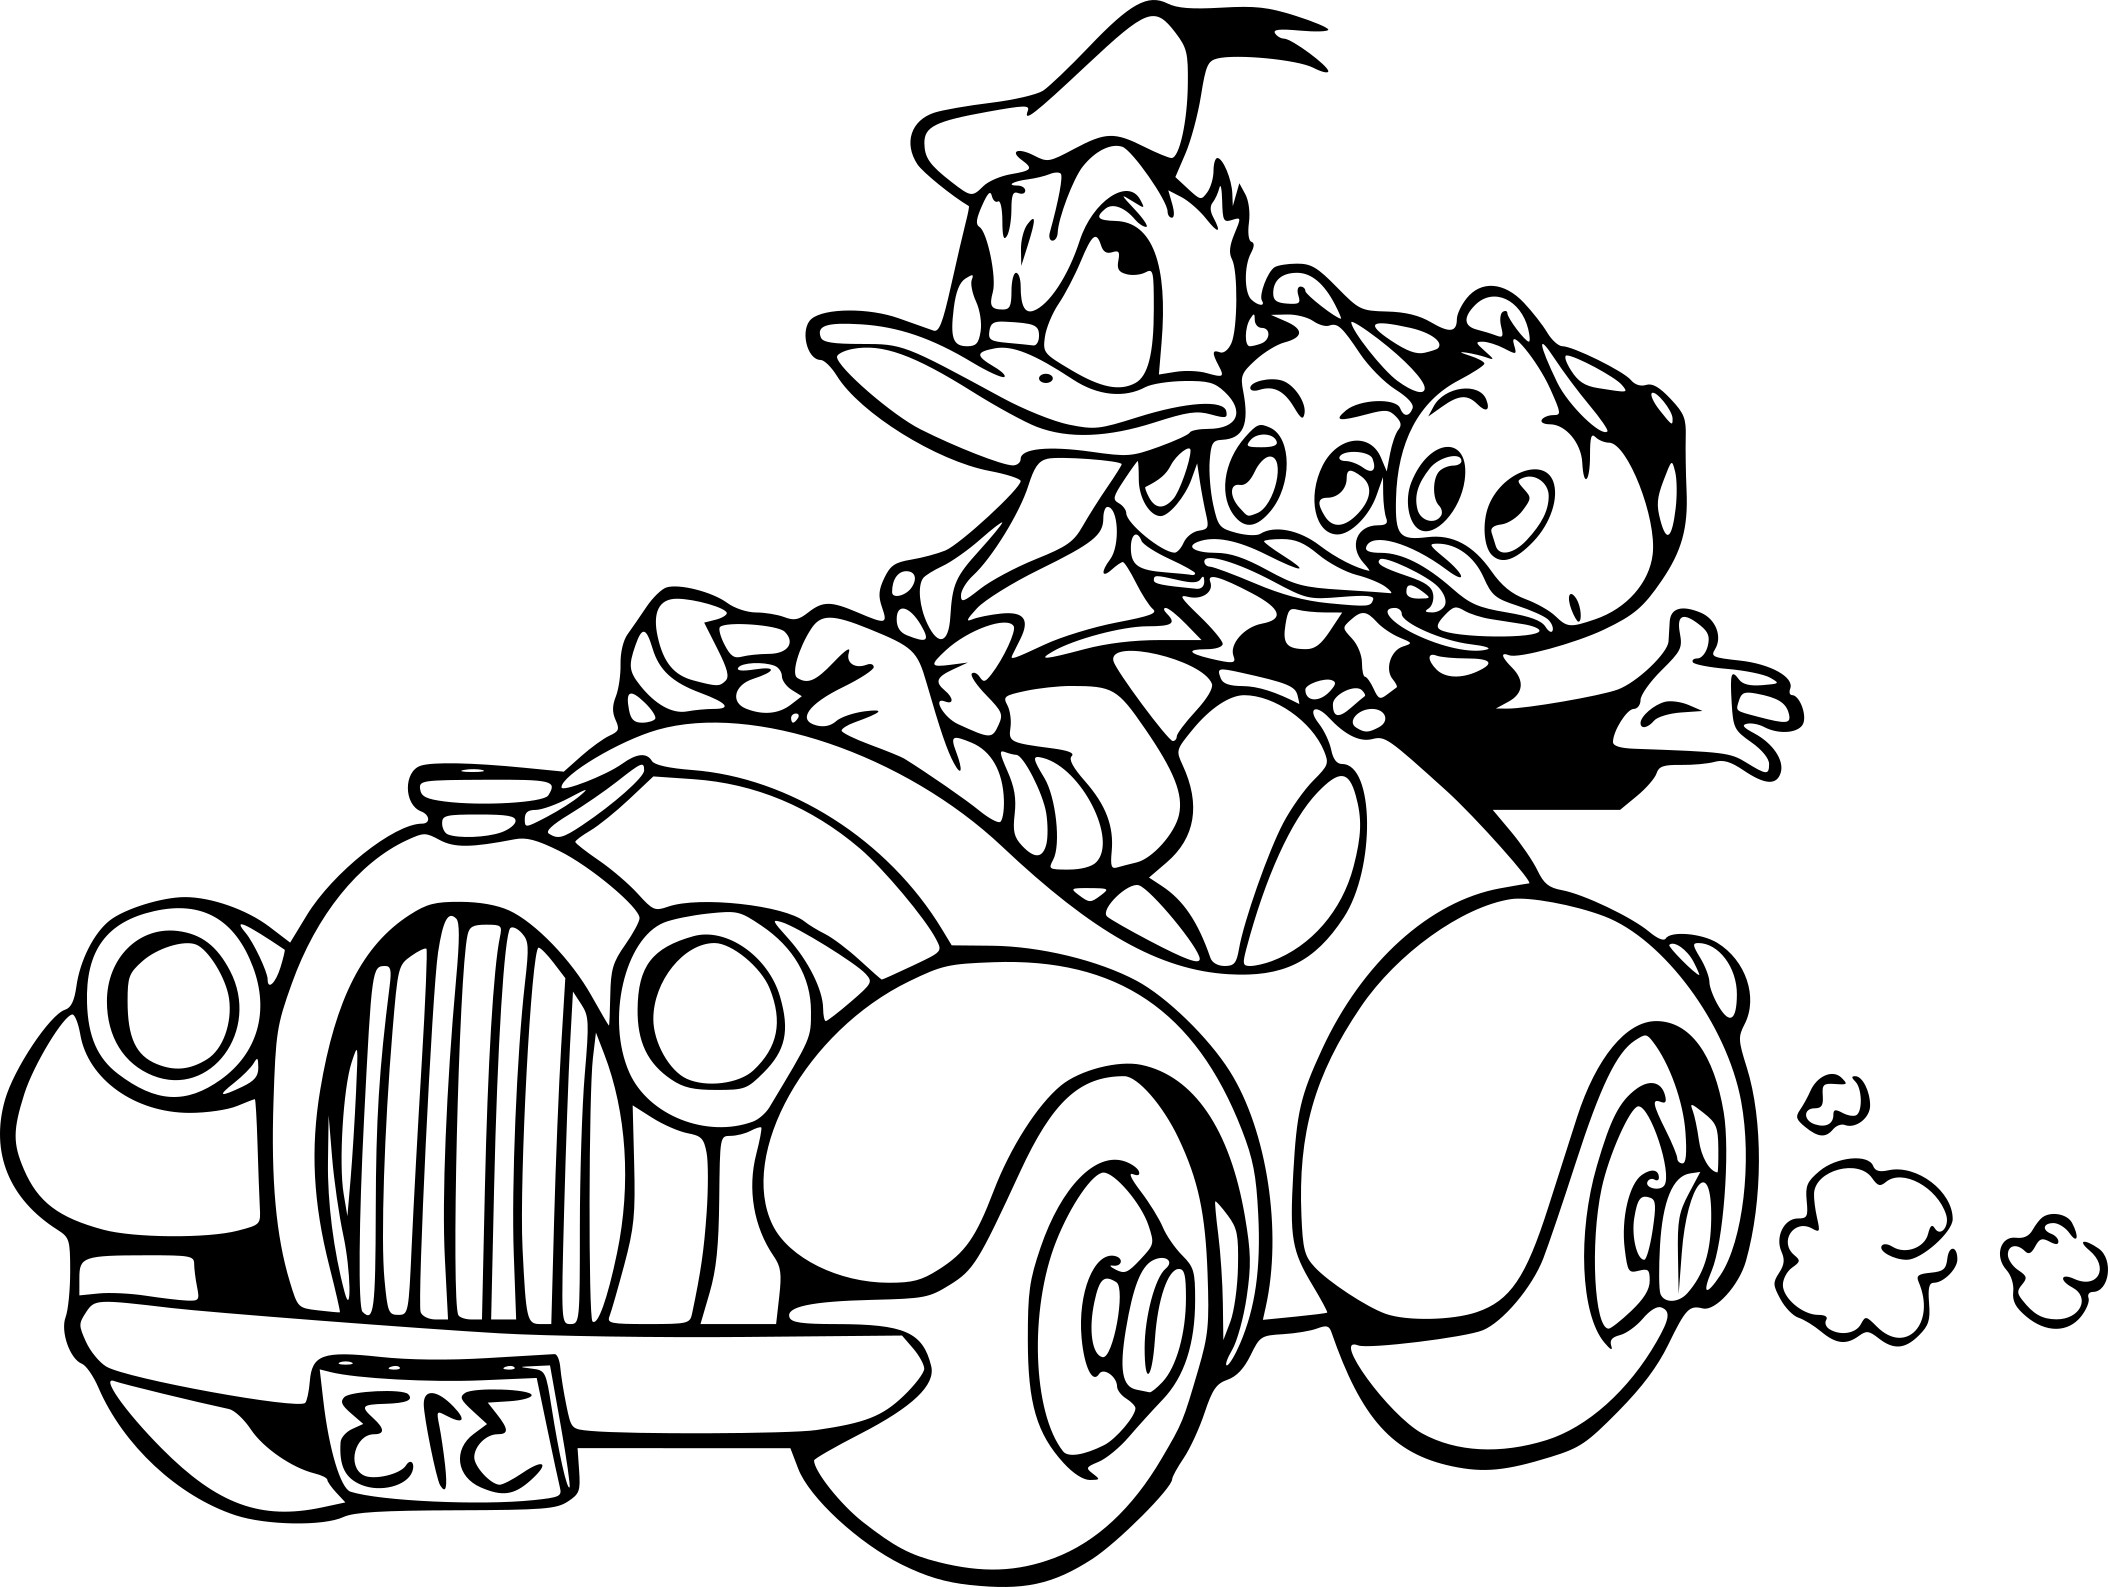 Donald By Car coloring page